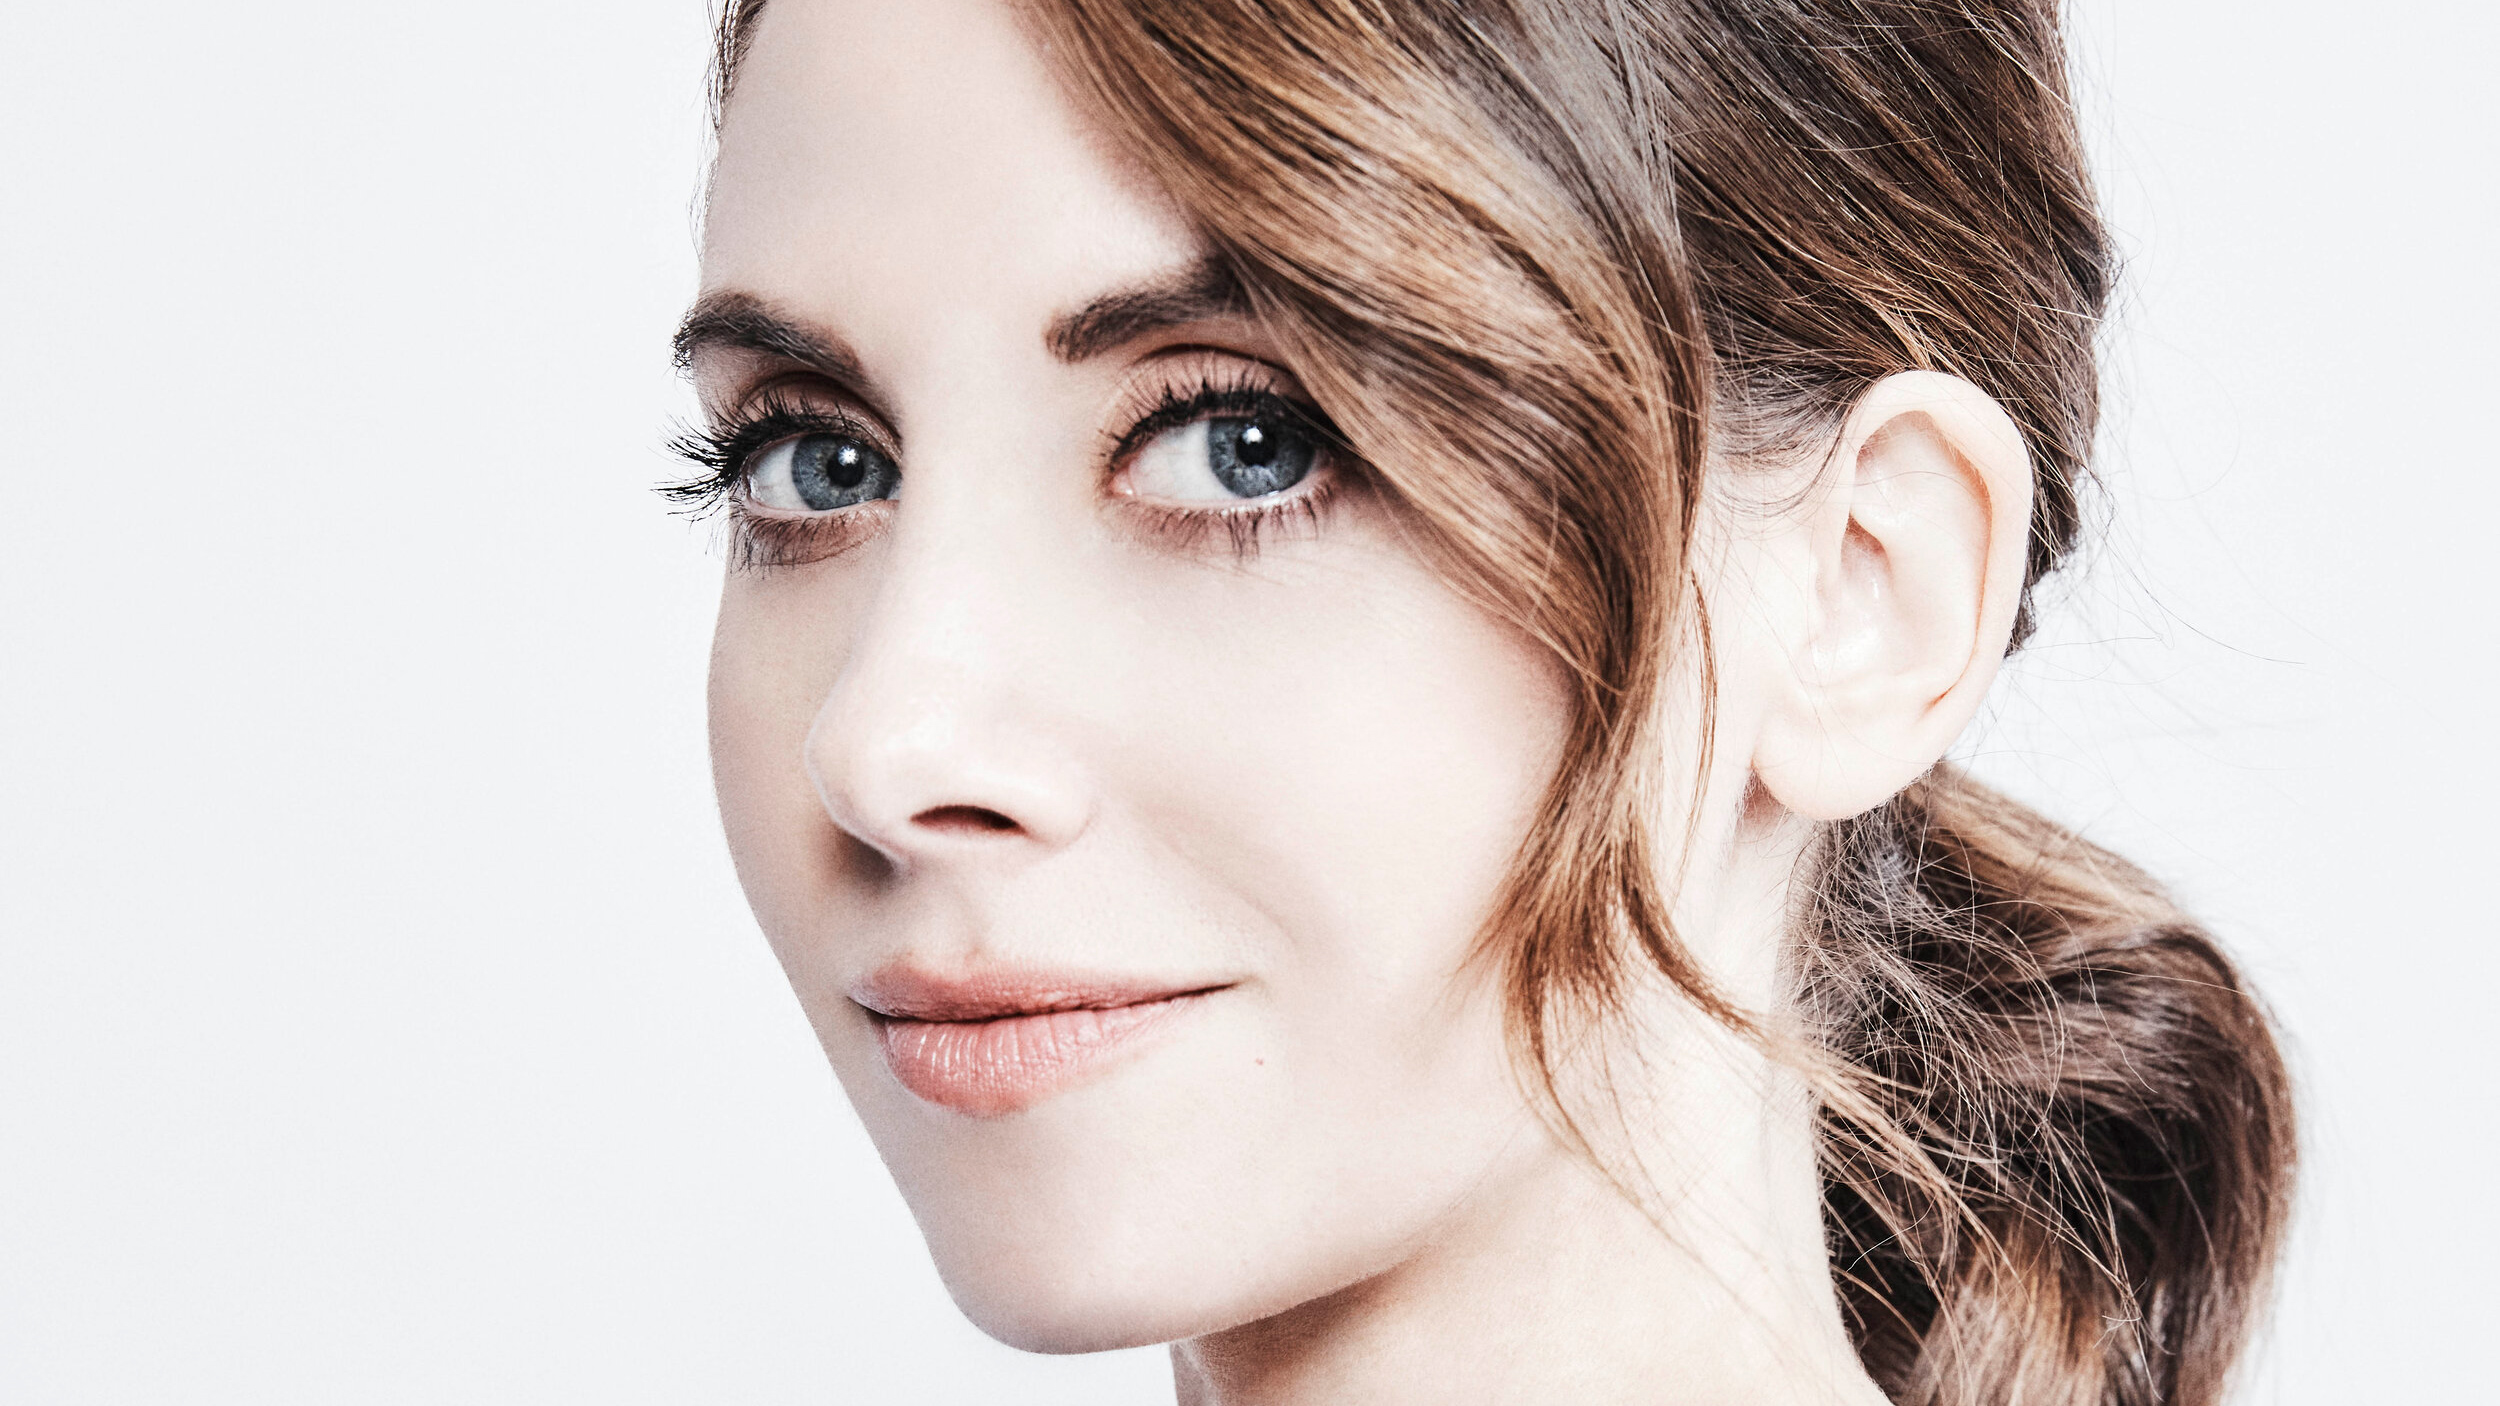 Actress Alison Brie American 2500x1406